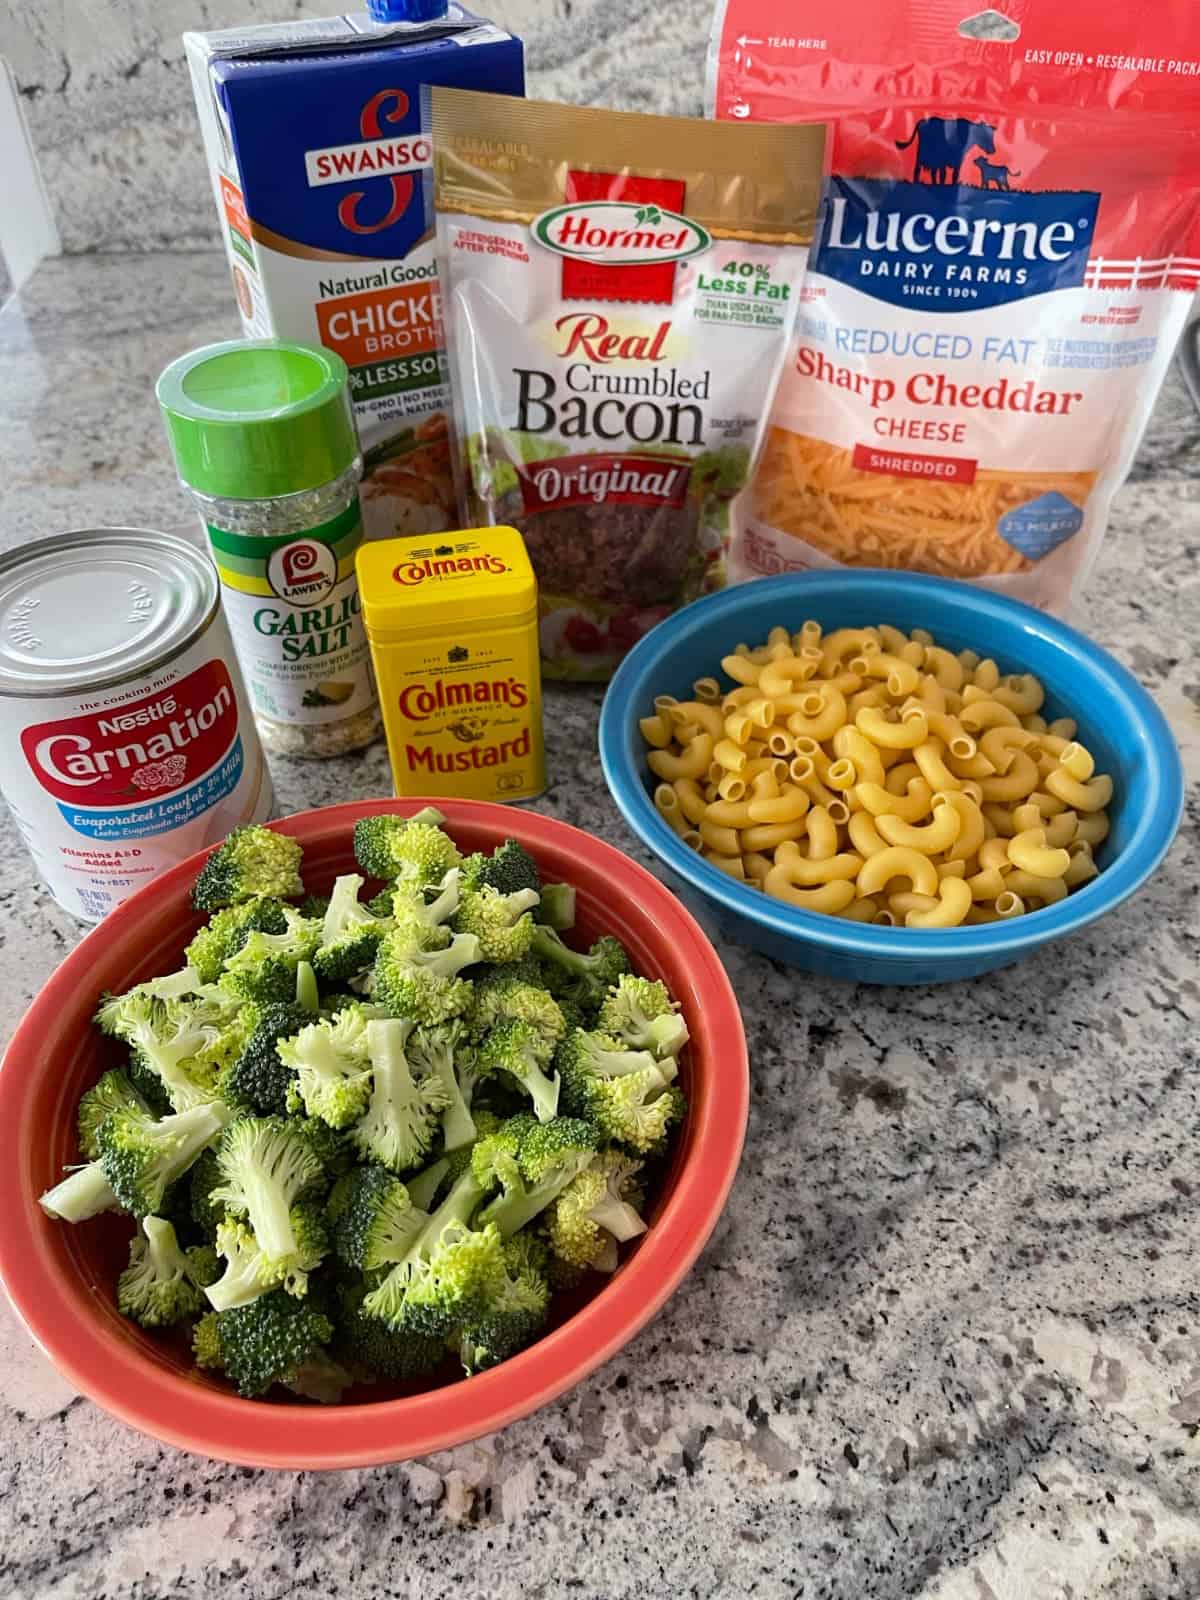 Broccoli florets, macaroni, cheddar cheese, real bacon bits and spices for making macaroni and cheese.